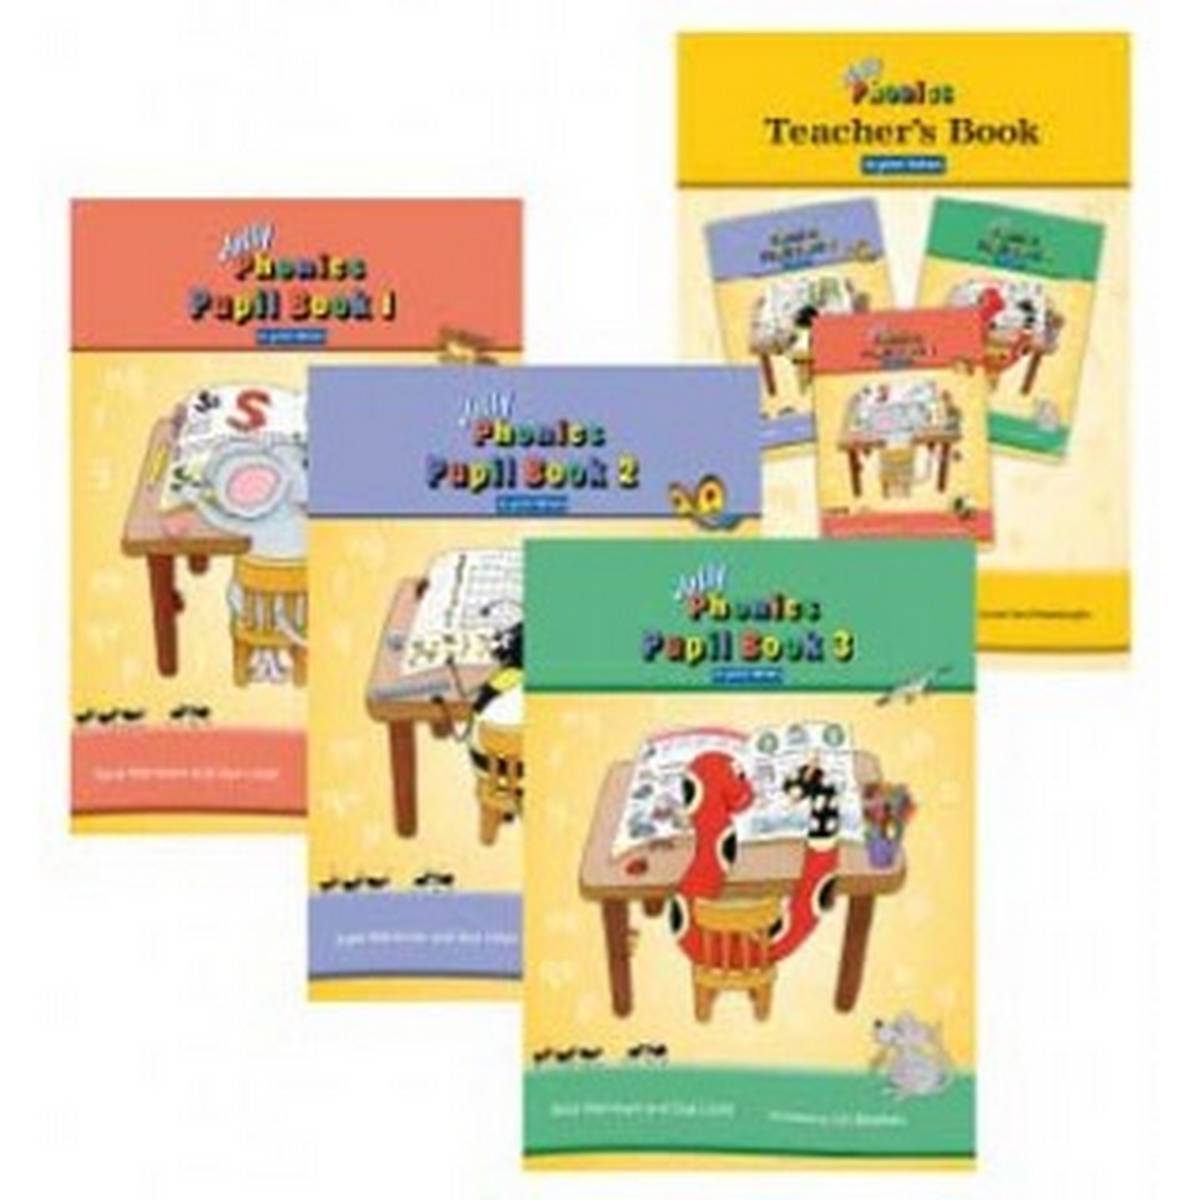 Jolly Phonics Class Set (Colour In Print Letters)